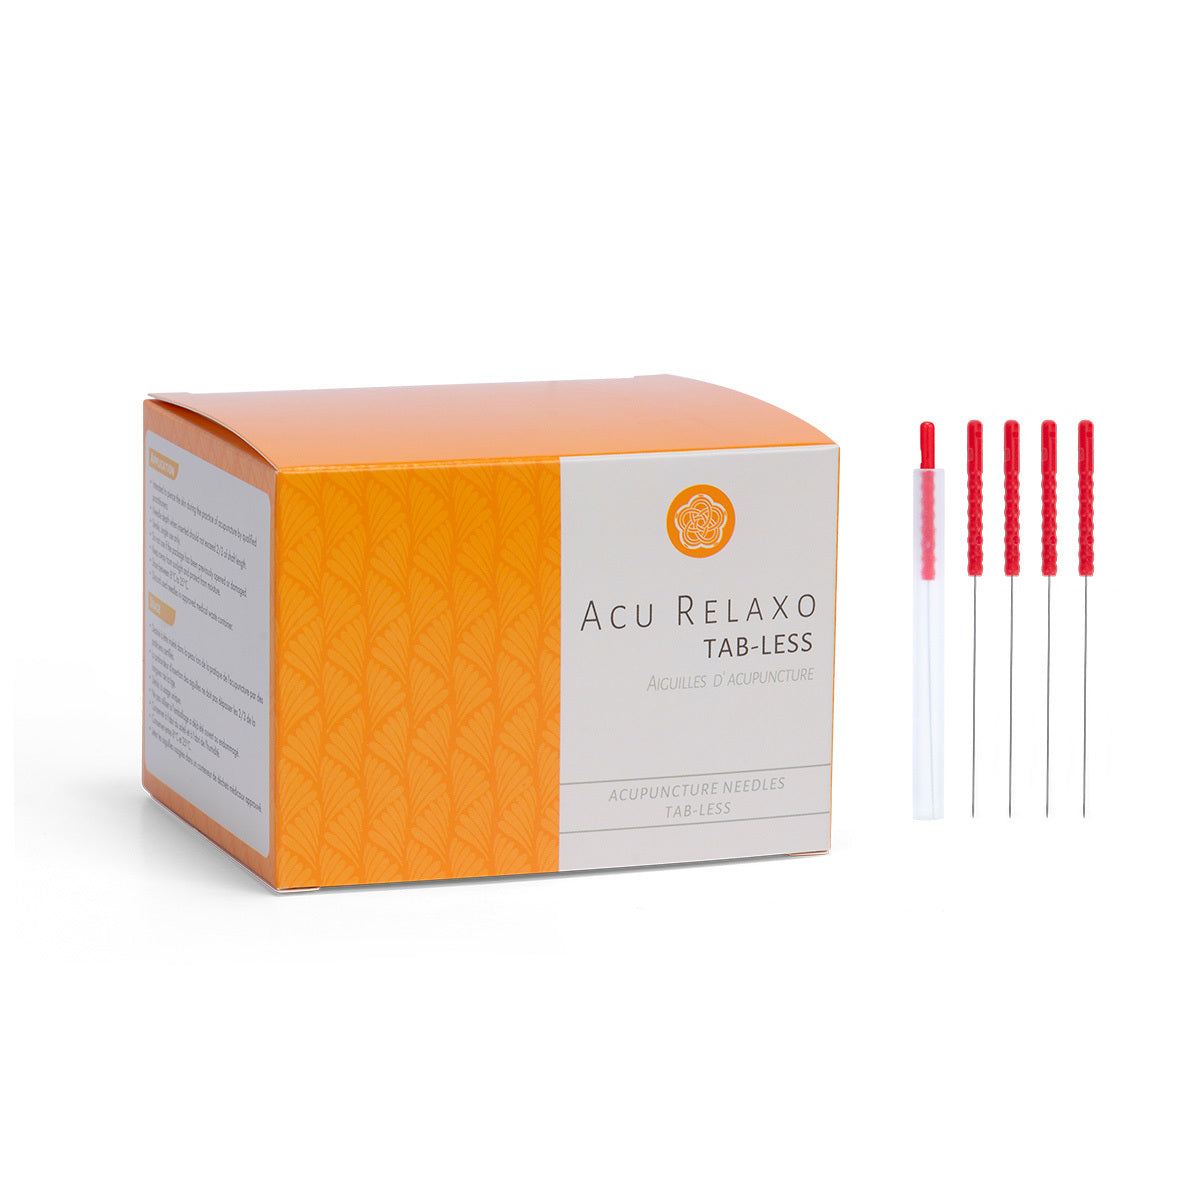 Acu Relaxo Tab-less Acupuncture Needles 500pcs/box